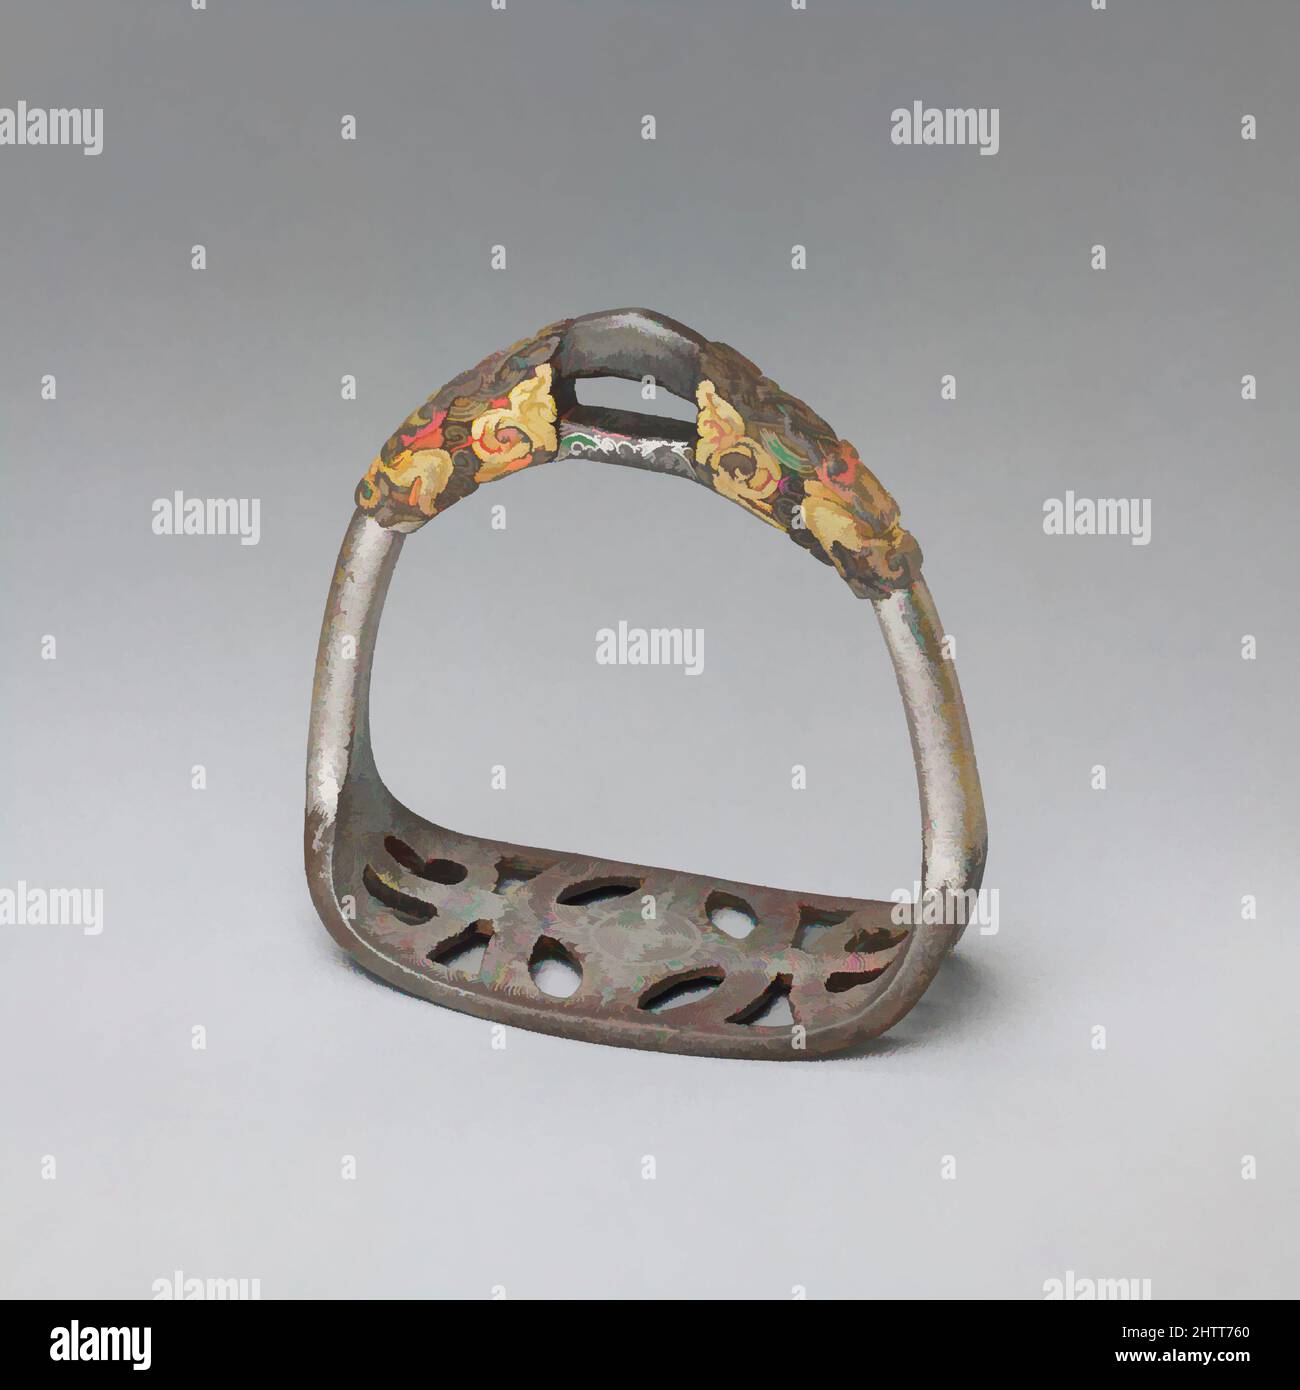 Art inspired by Stirrup, 15th–18th century, Tibetan, Iron, gold, silver, H. 4 1/2 in. (11.9 cm), Equestrian Equipment-Stirrups, Classic works modernized by Artotop with a splash of modernity. Shapes, color and value, eye-catching visual impact on art. Emotions through freedom of artworks in a contemporary way. A timeless message pursuing a wildly creative new direction. Artists turning to the digital medium and creating the Artotop NFT Stock Photo